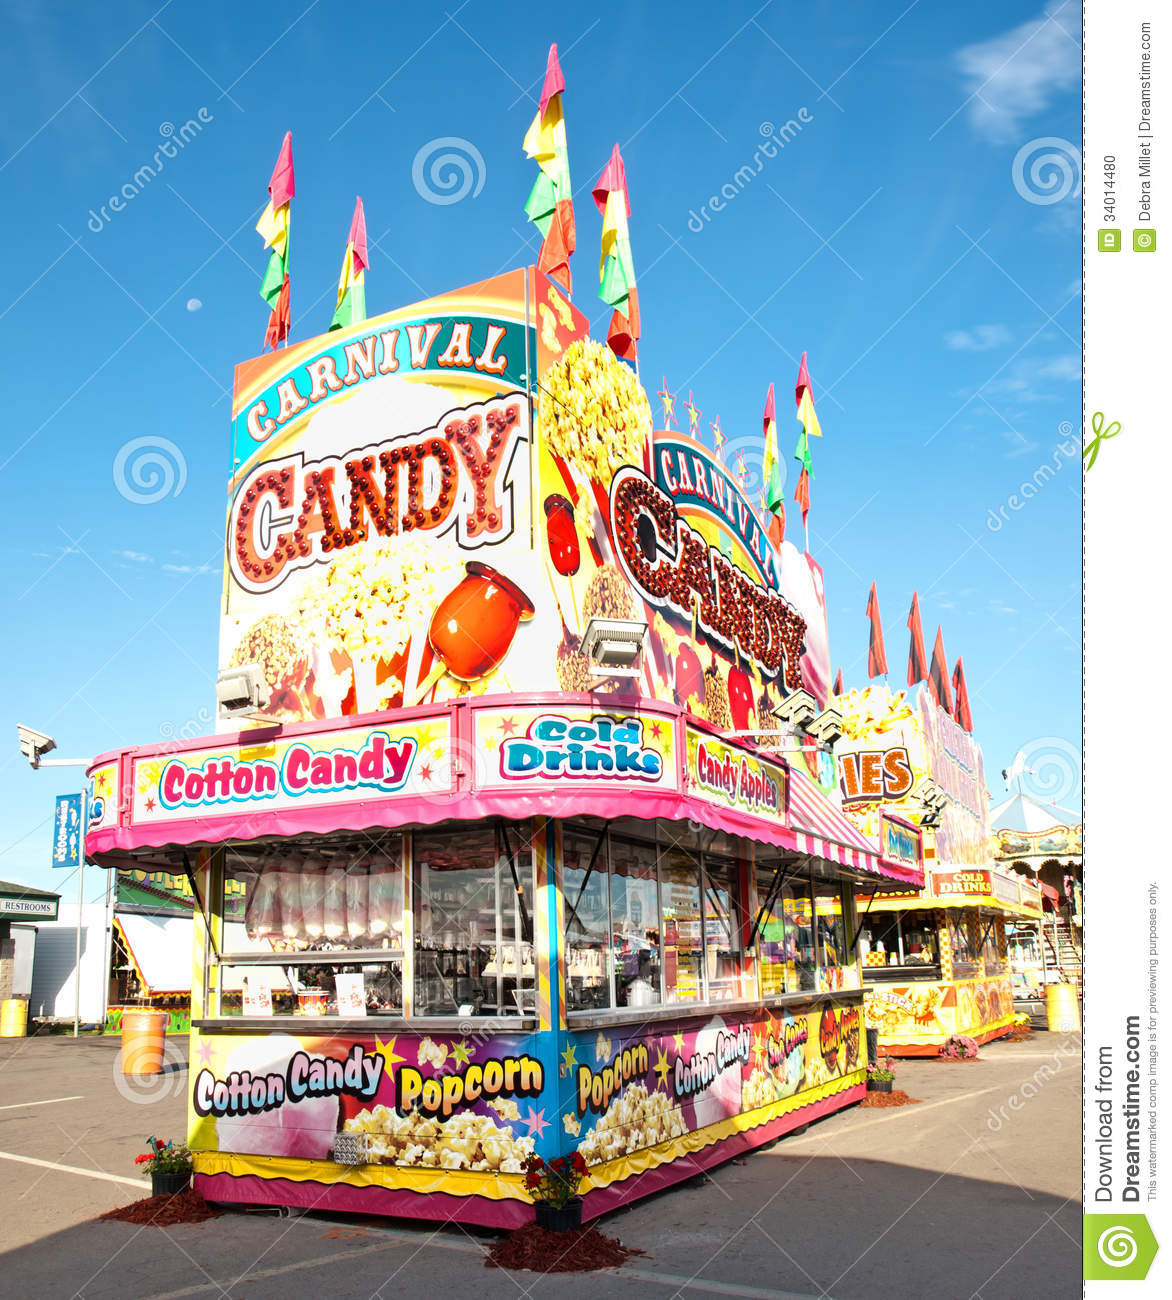 Snack Stand Stock Photo   Image  34014480